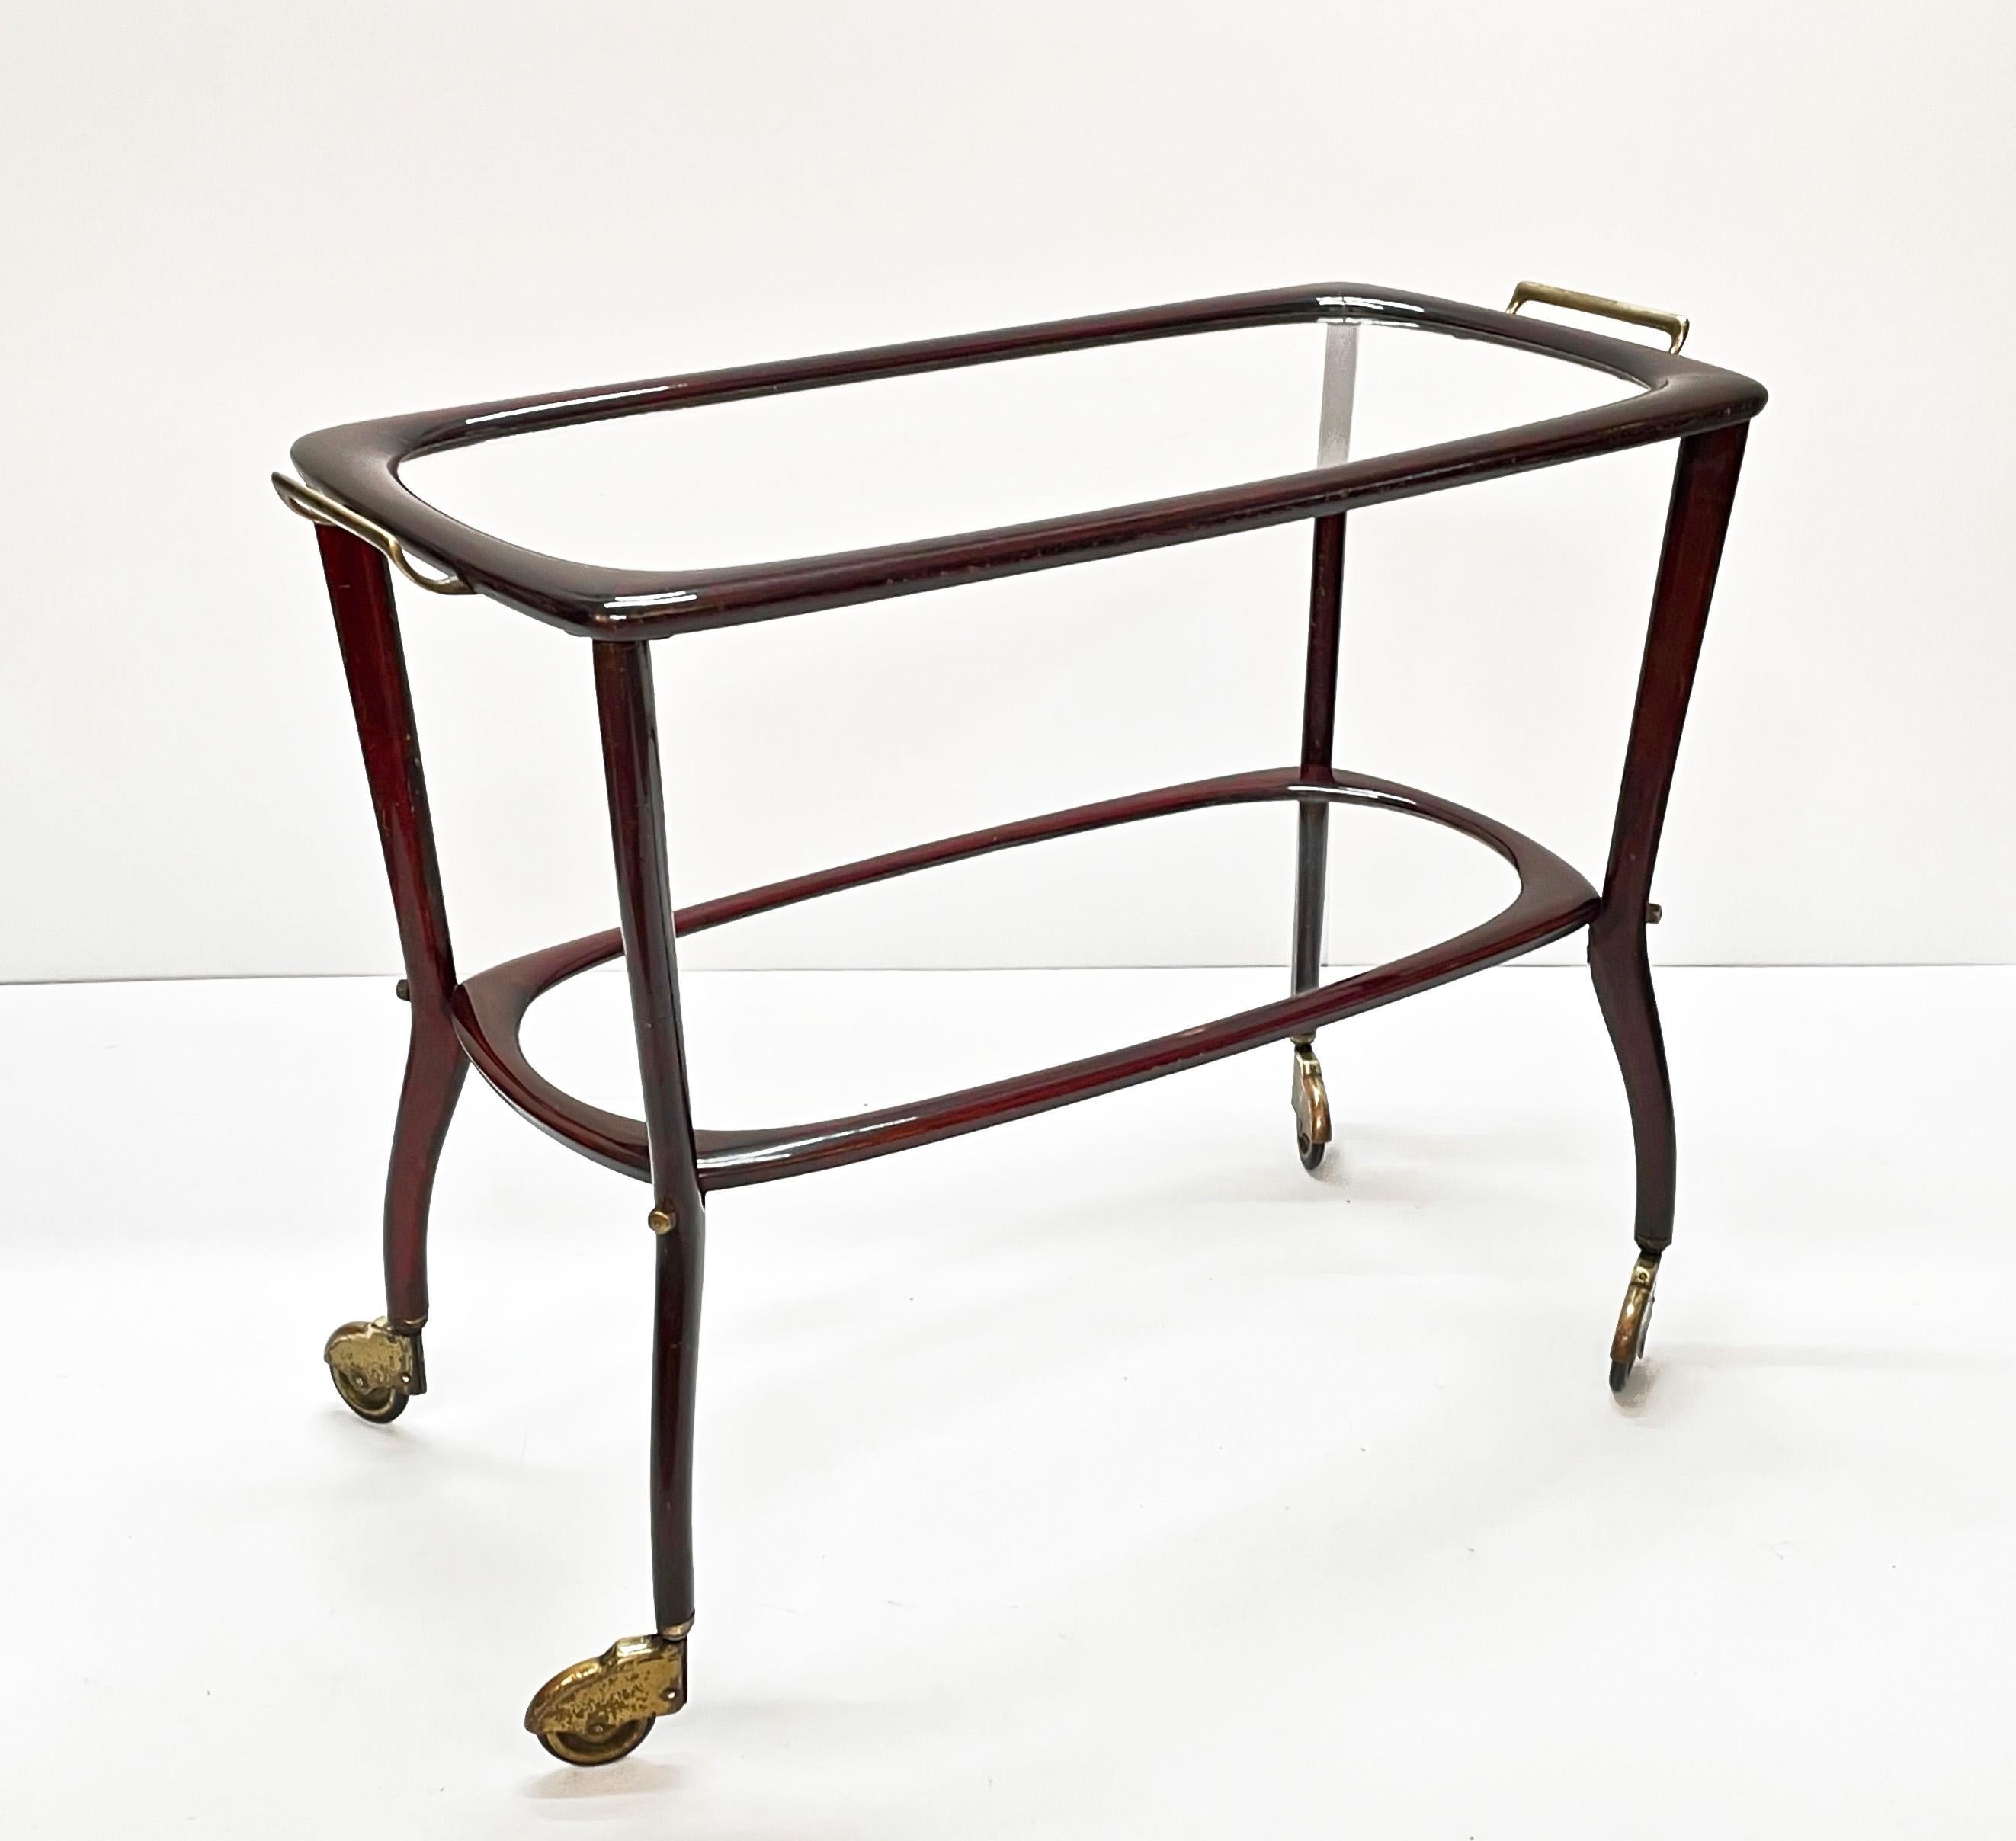 Amazing midcentury wood and glass trolley bar cart. This fantastic item was produced in Italy during the 1950s by Cesare Lacca.

The smooth lines are just fantastic and the mix with the crystal glass shelves make this item light and delicate. The